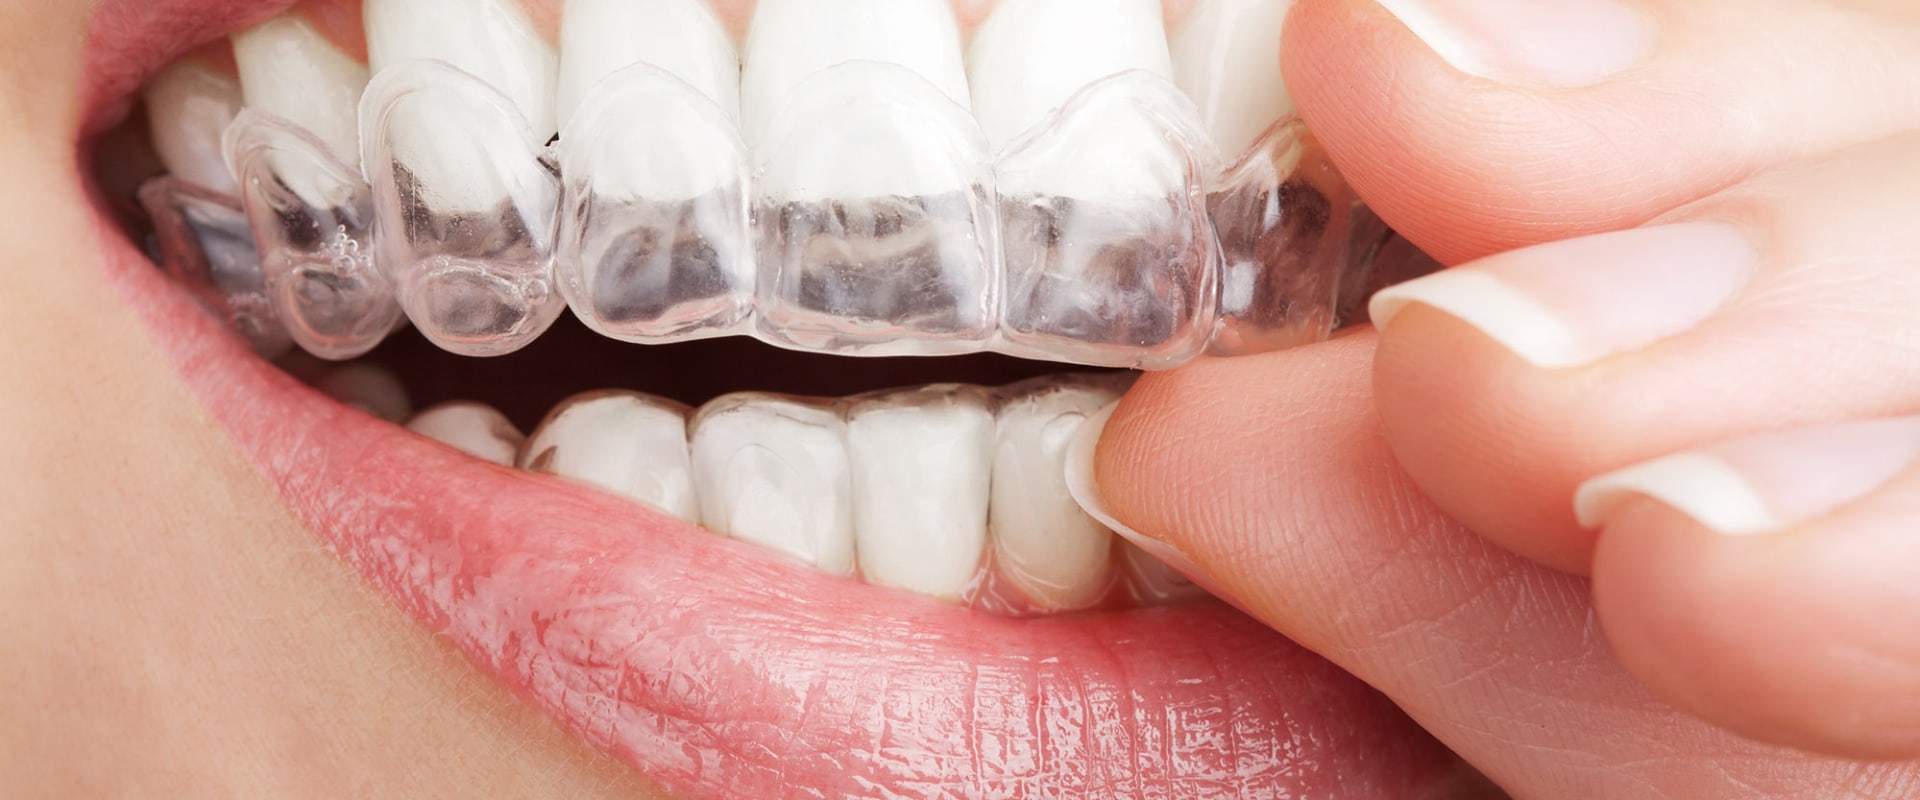 What Are the Consequences of Changing Invisalign Aligners Too Early?